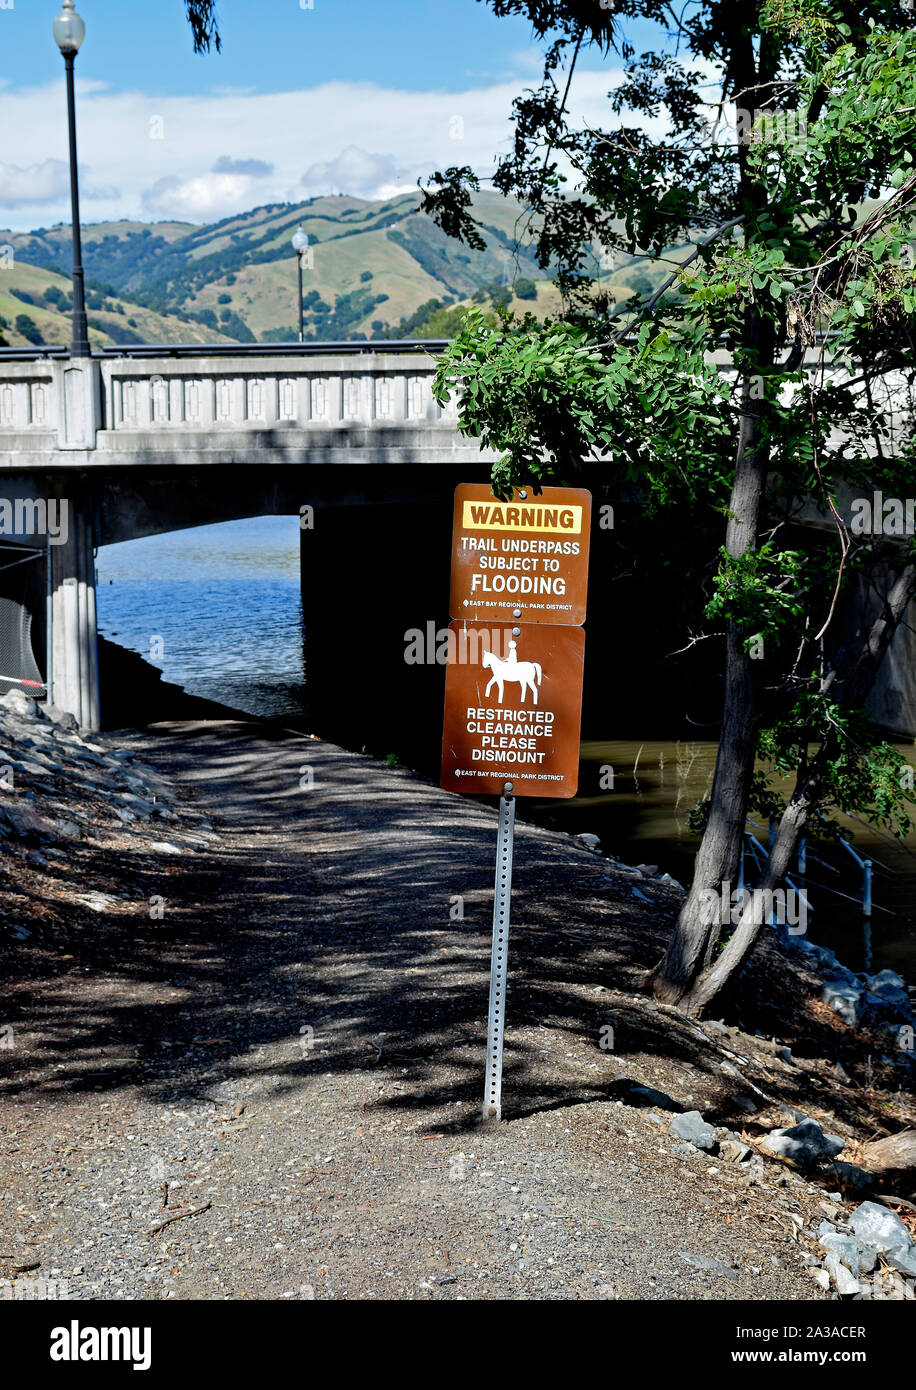 Restricted clearance Please dismount and warning, trail underpass subject to flooding sign near Mission Boulevard, Alameda Creek, Alameda County, California Stock Photo